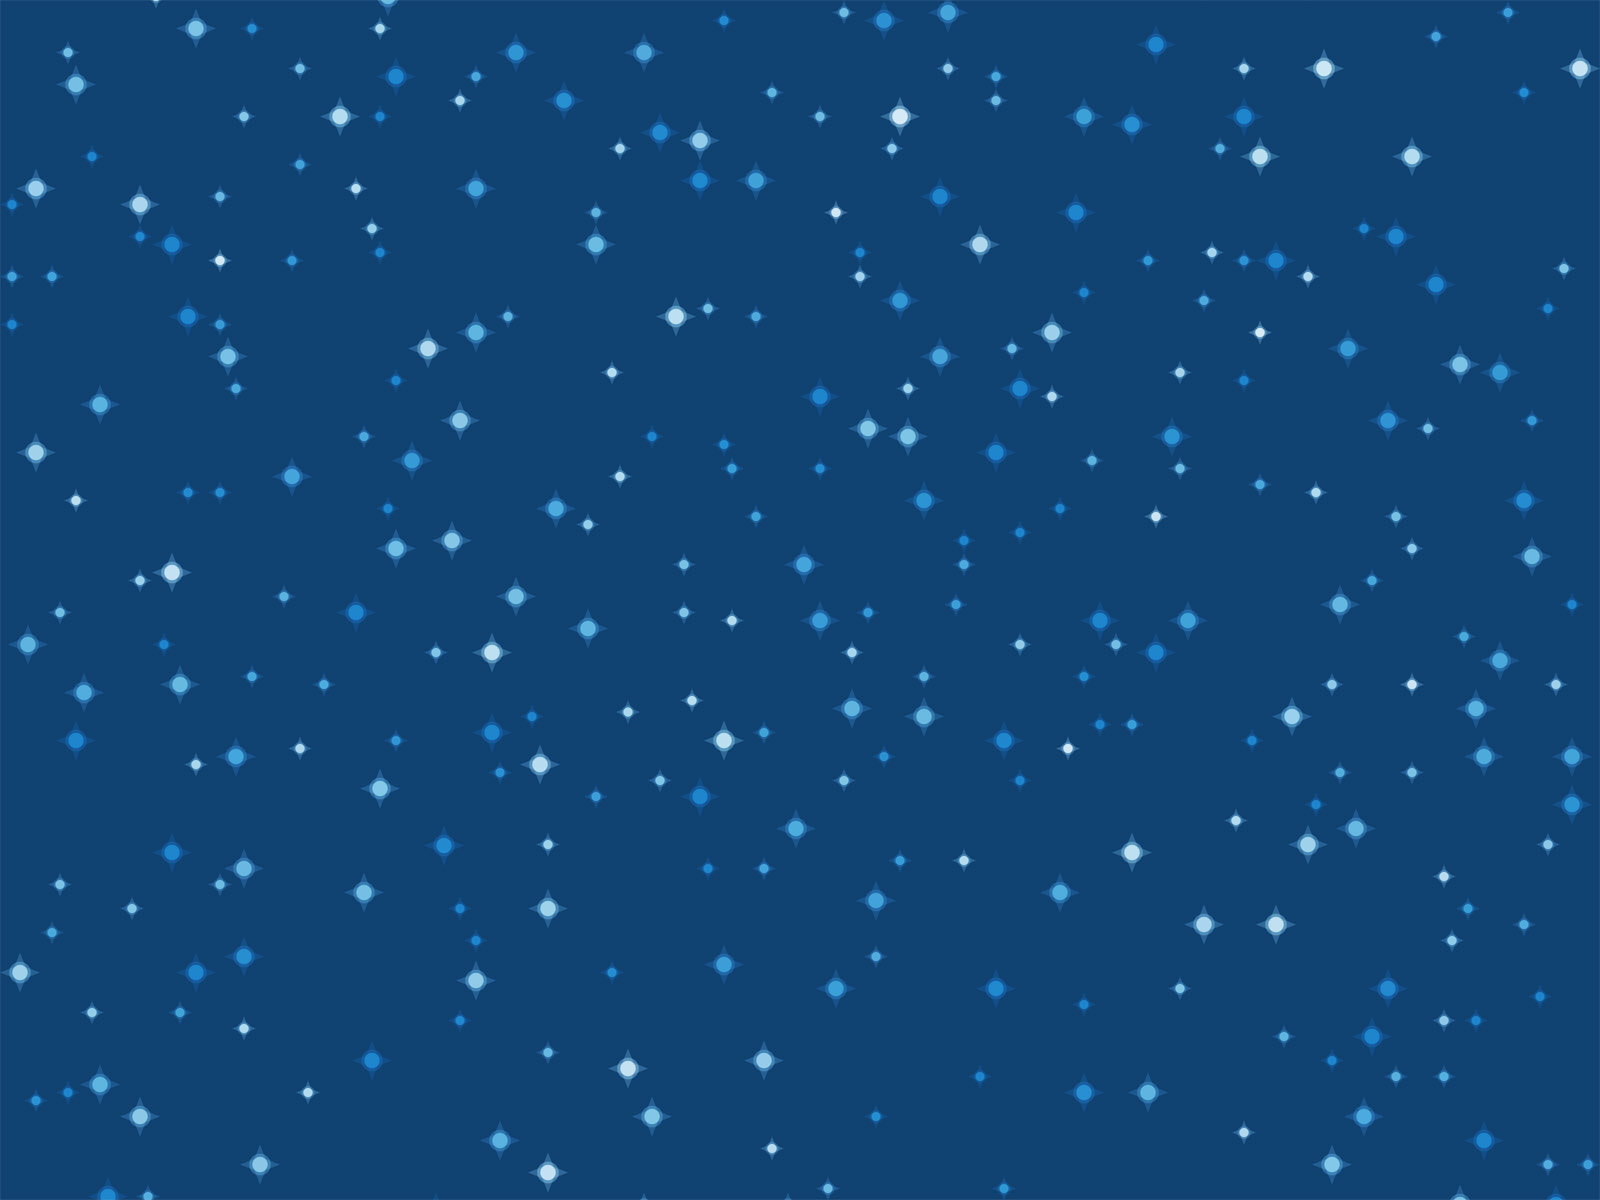 stars-pattern-backgrounds-pattern-templates-free-ppt-grounds-and